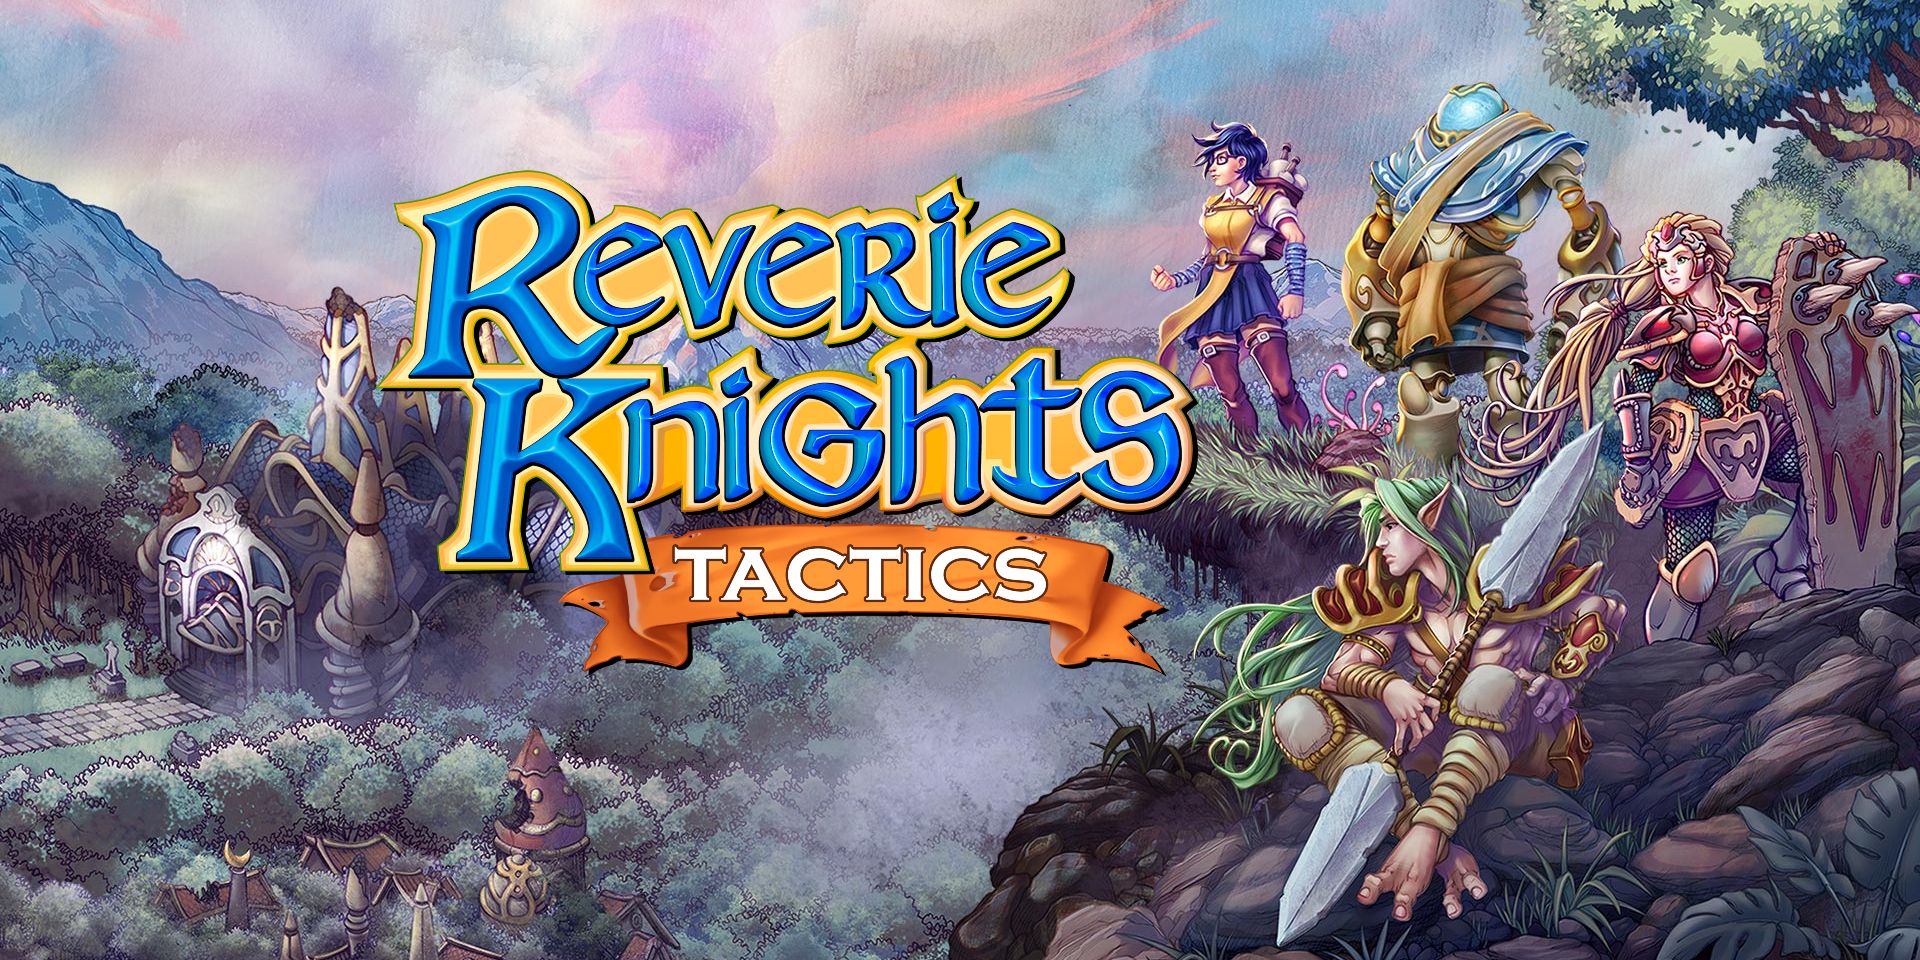 Reverie Knights Tactics download the last version for iphone